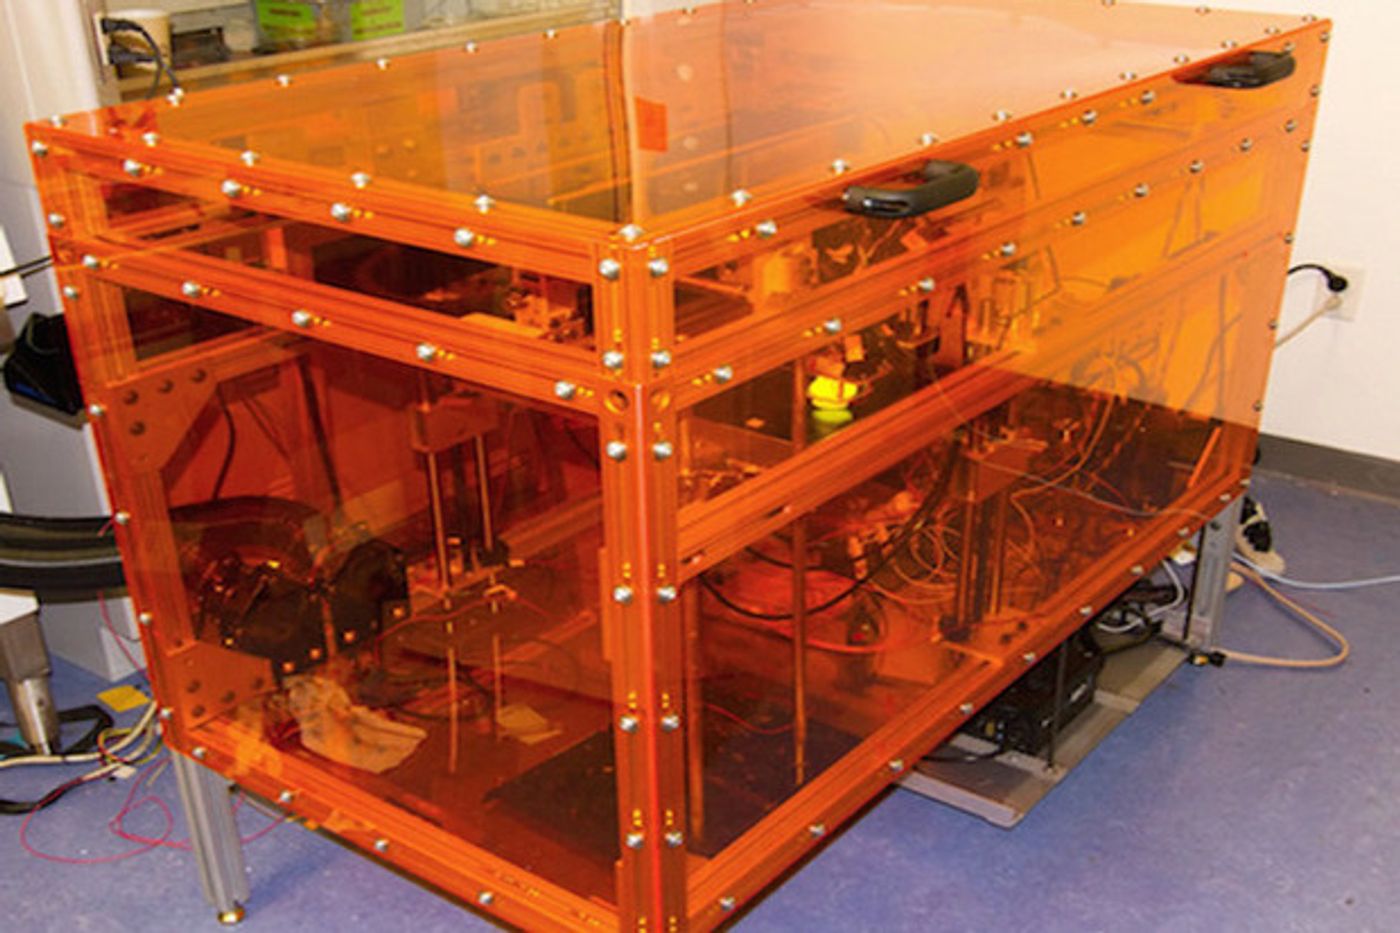 MultiFab is a 3D printer that can print with up to 10 different materials.